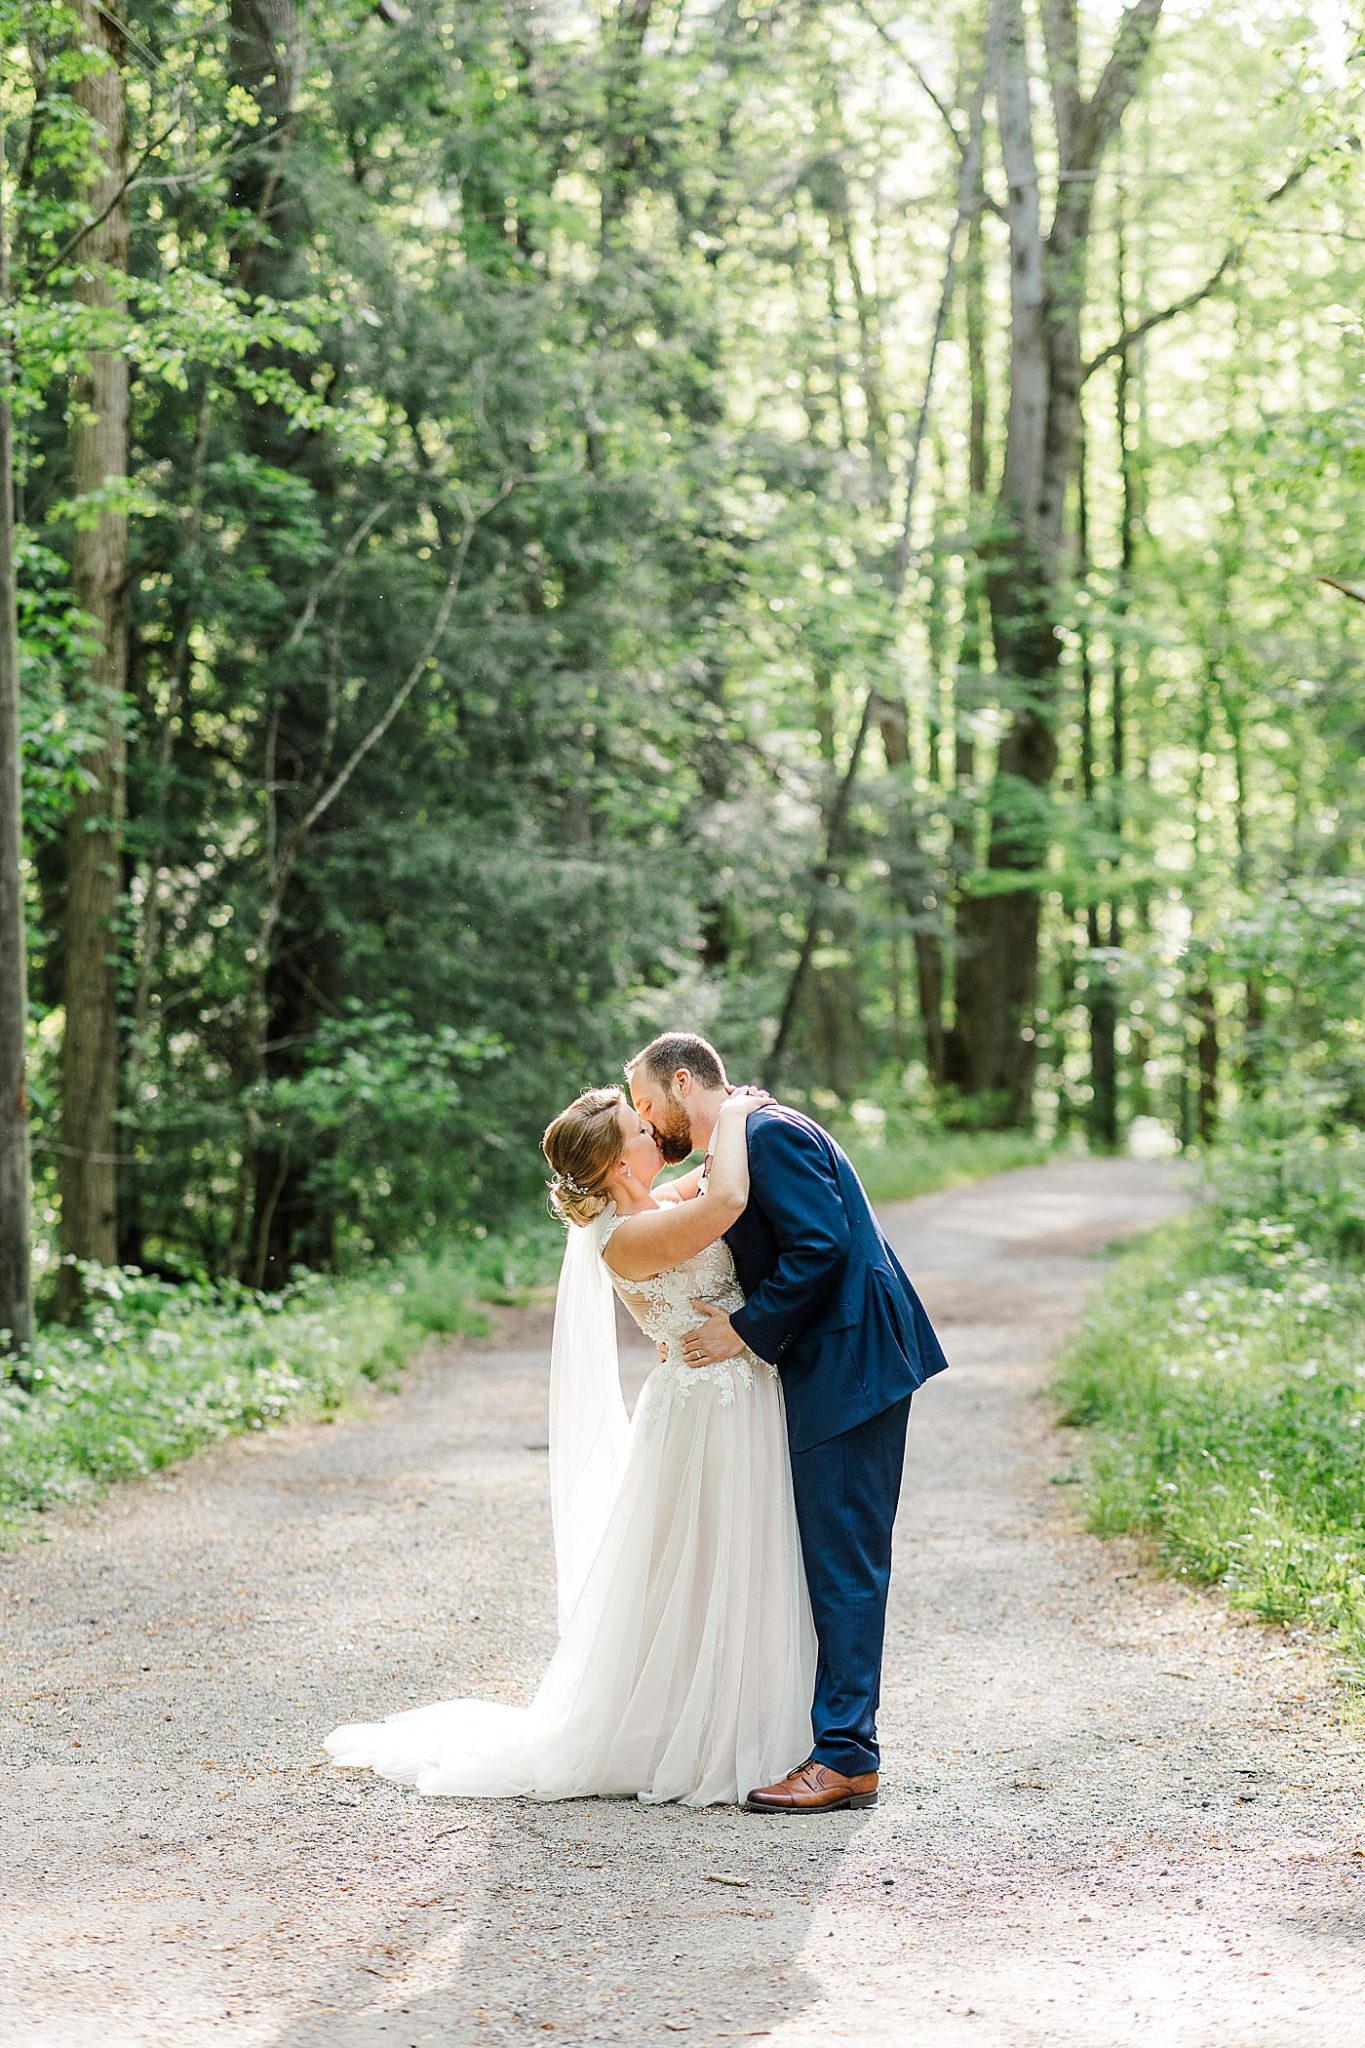 Spence Cabin Wedding in the Smoky Mountain National Park